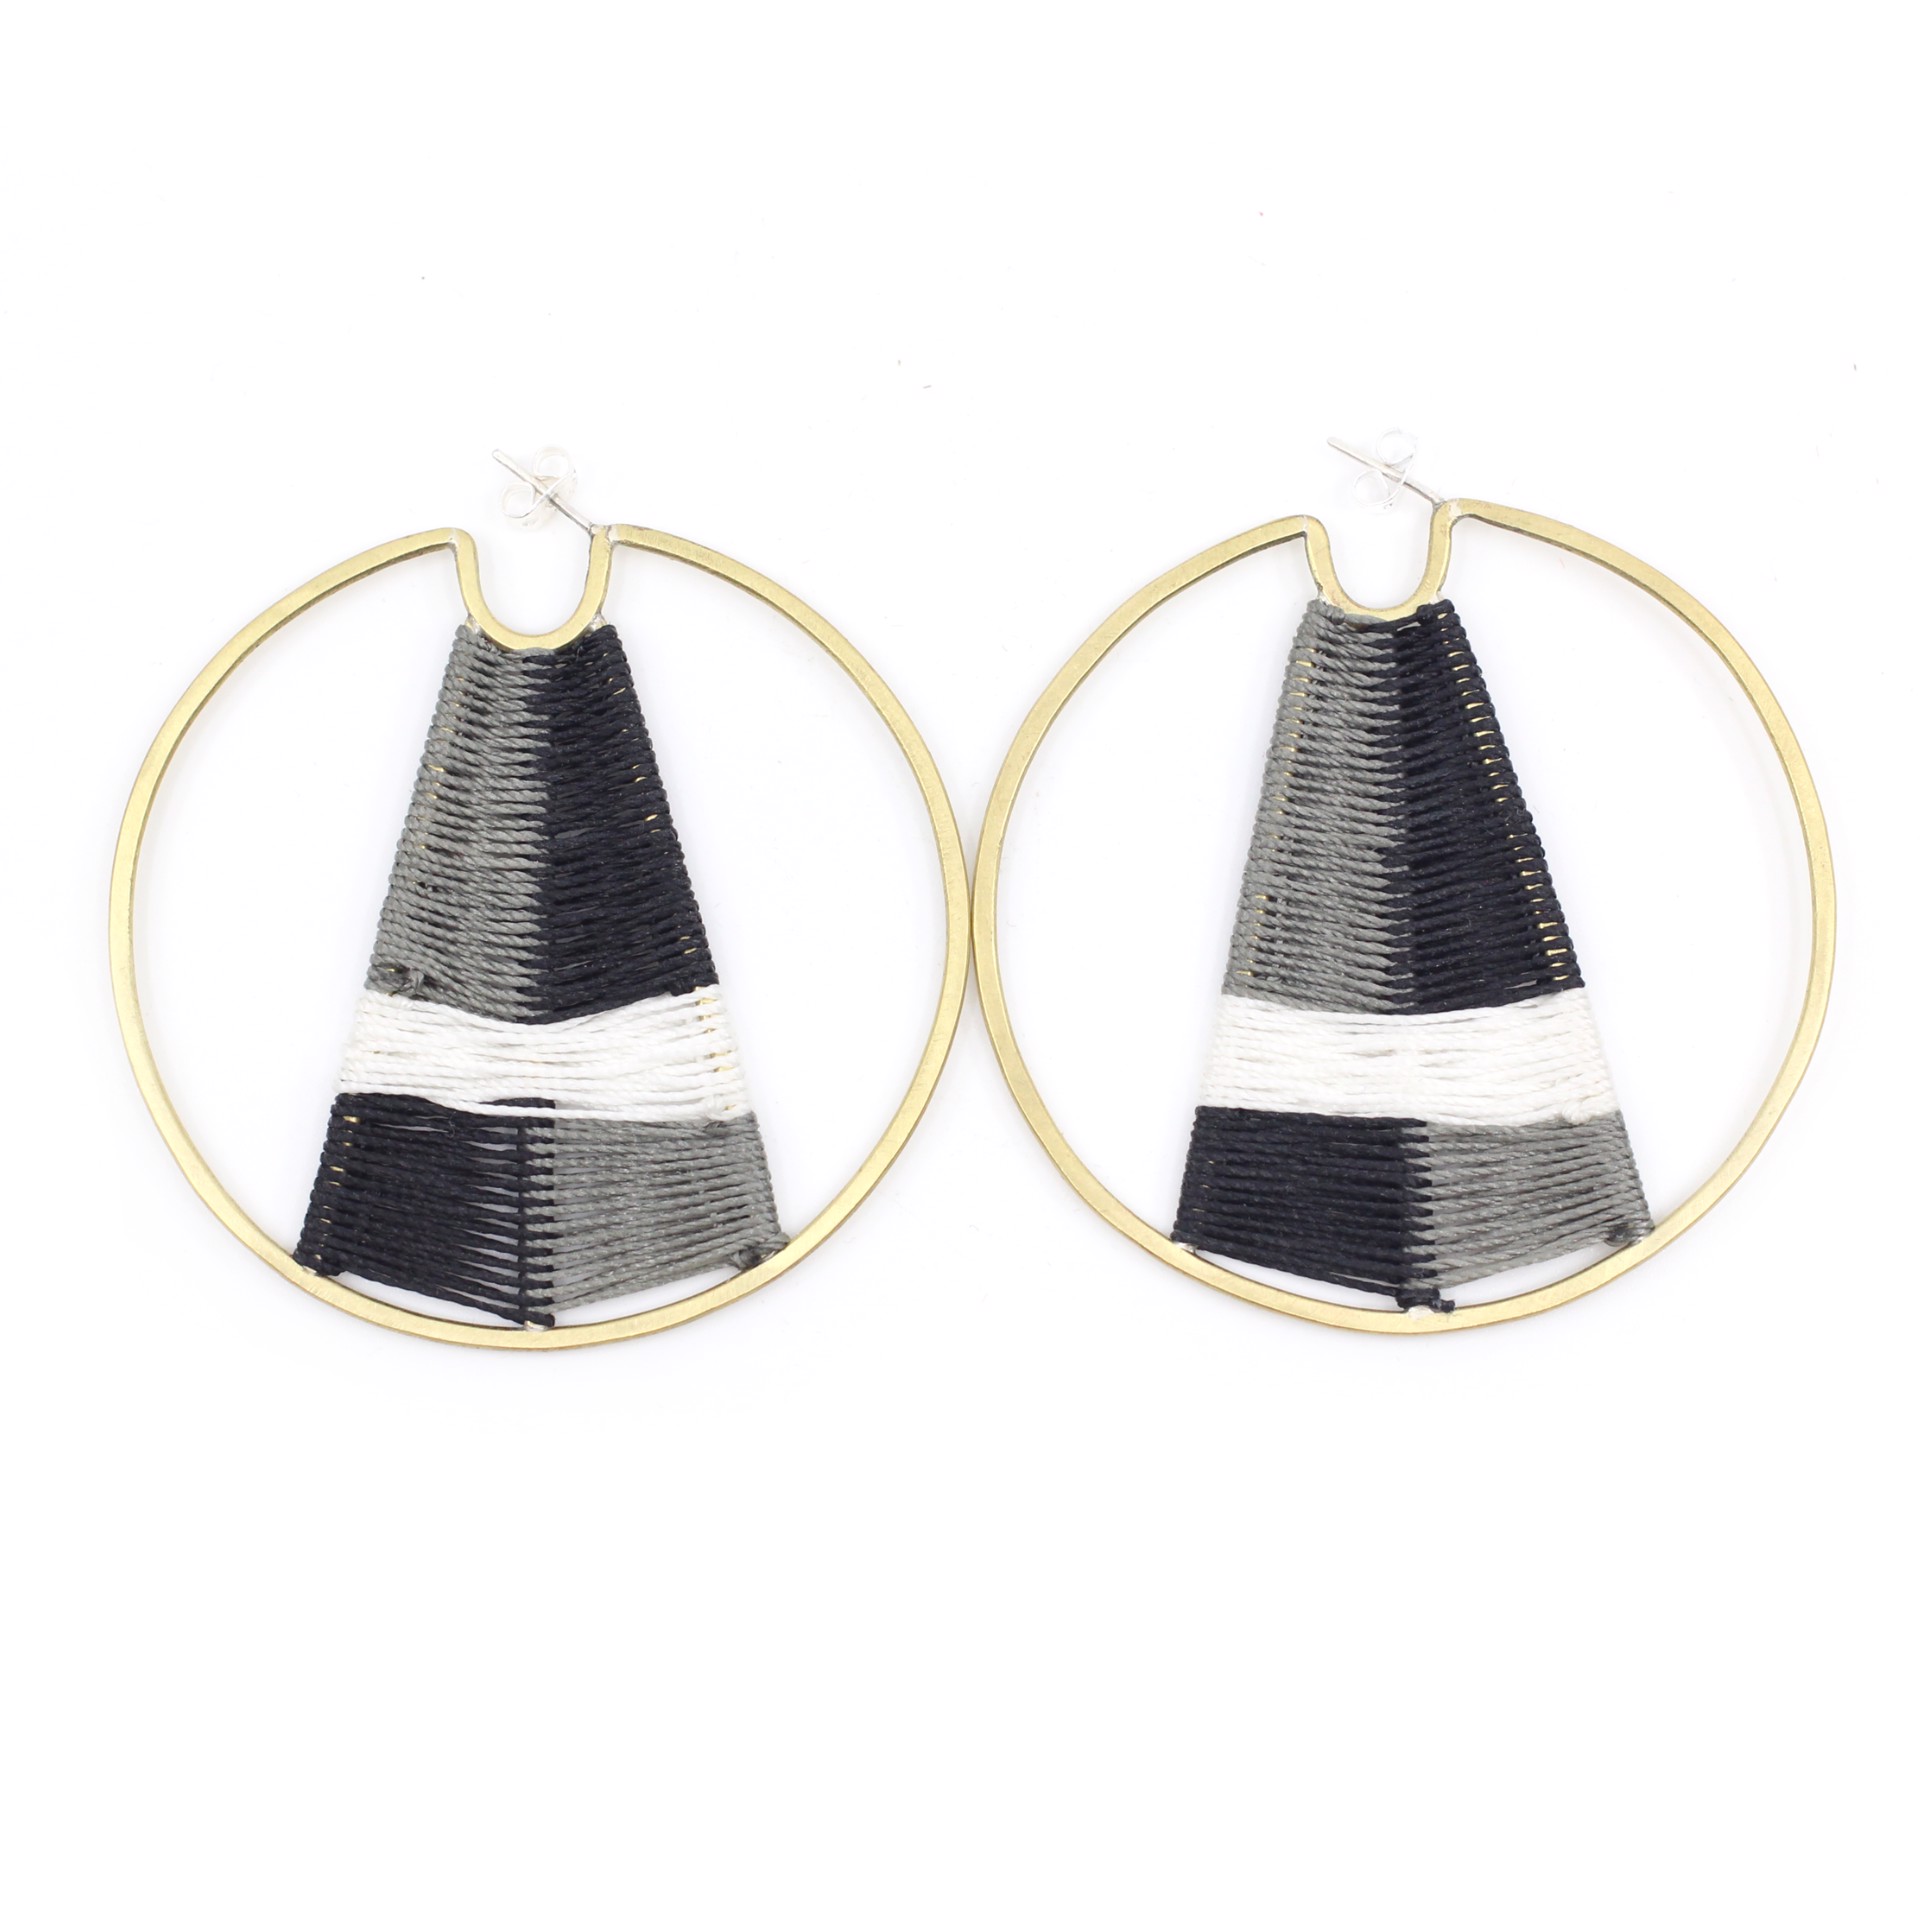 Woven Hoops (Black & White) by Flag Mountain Jewelry